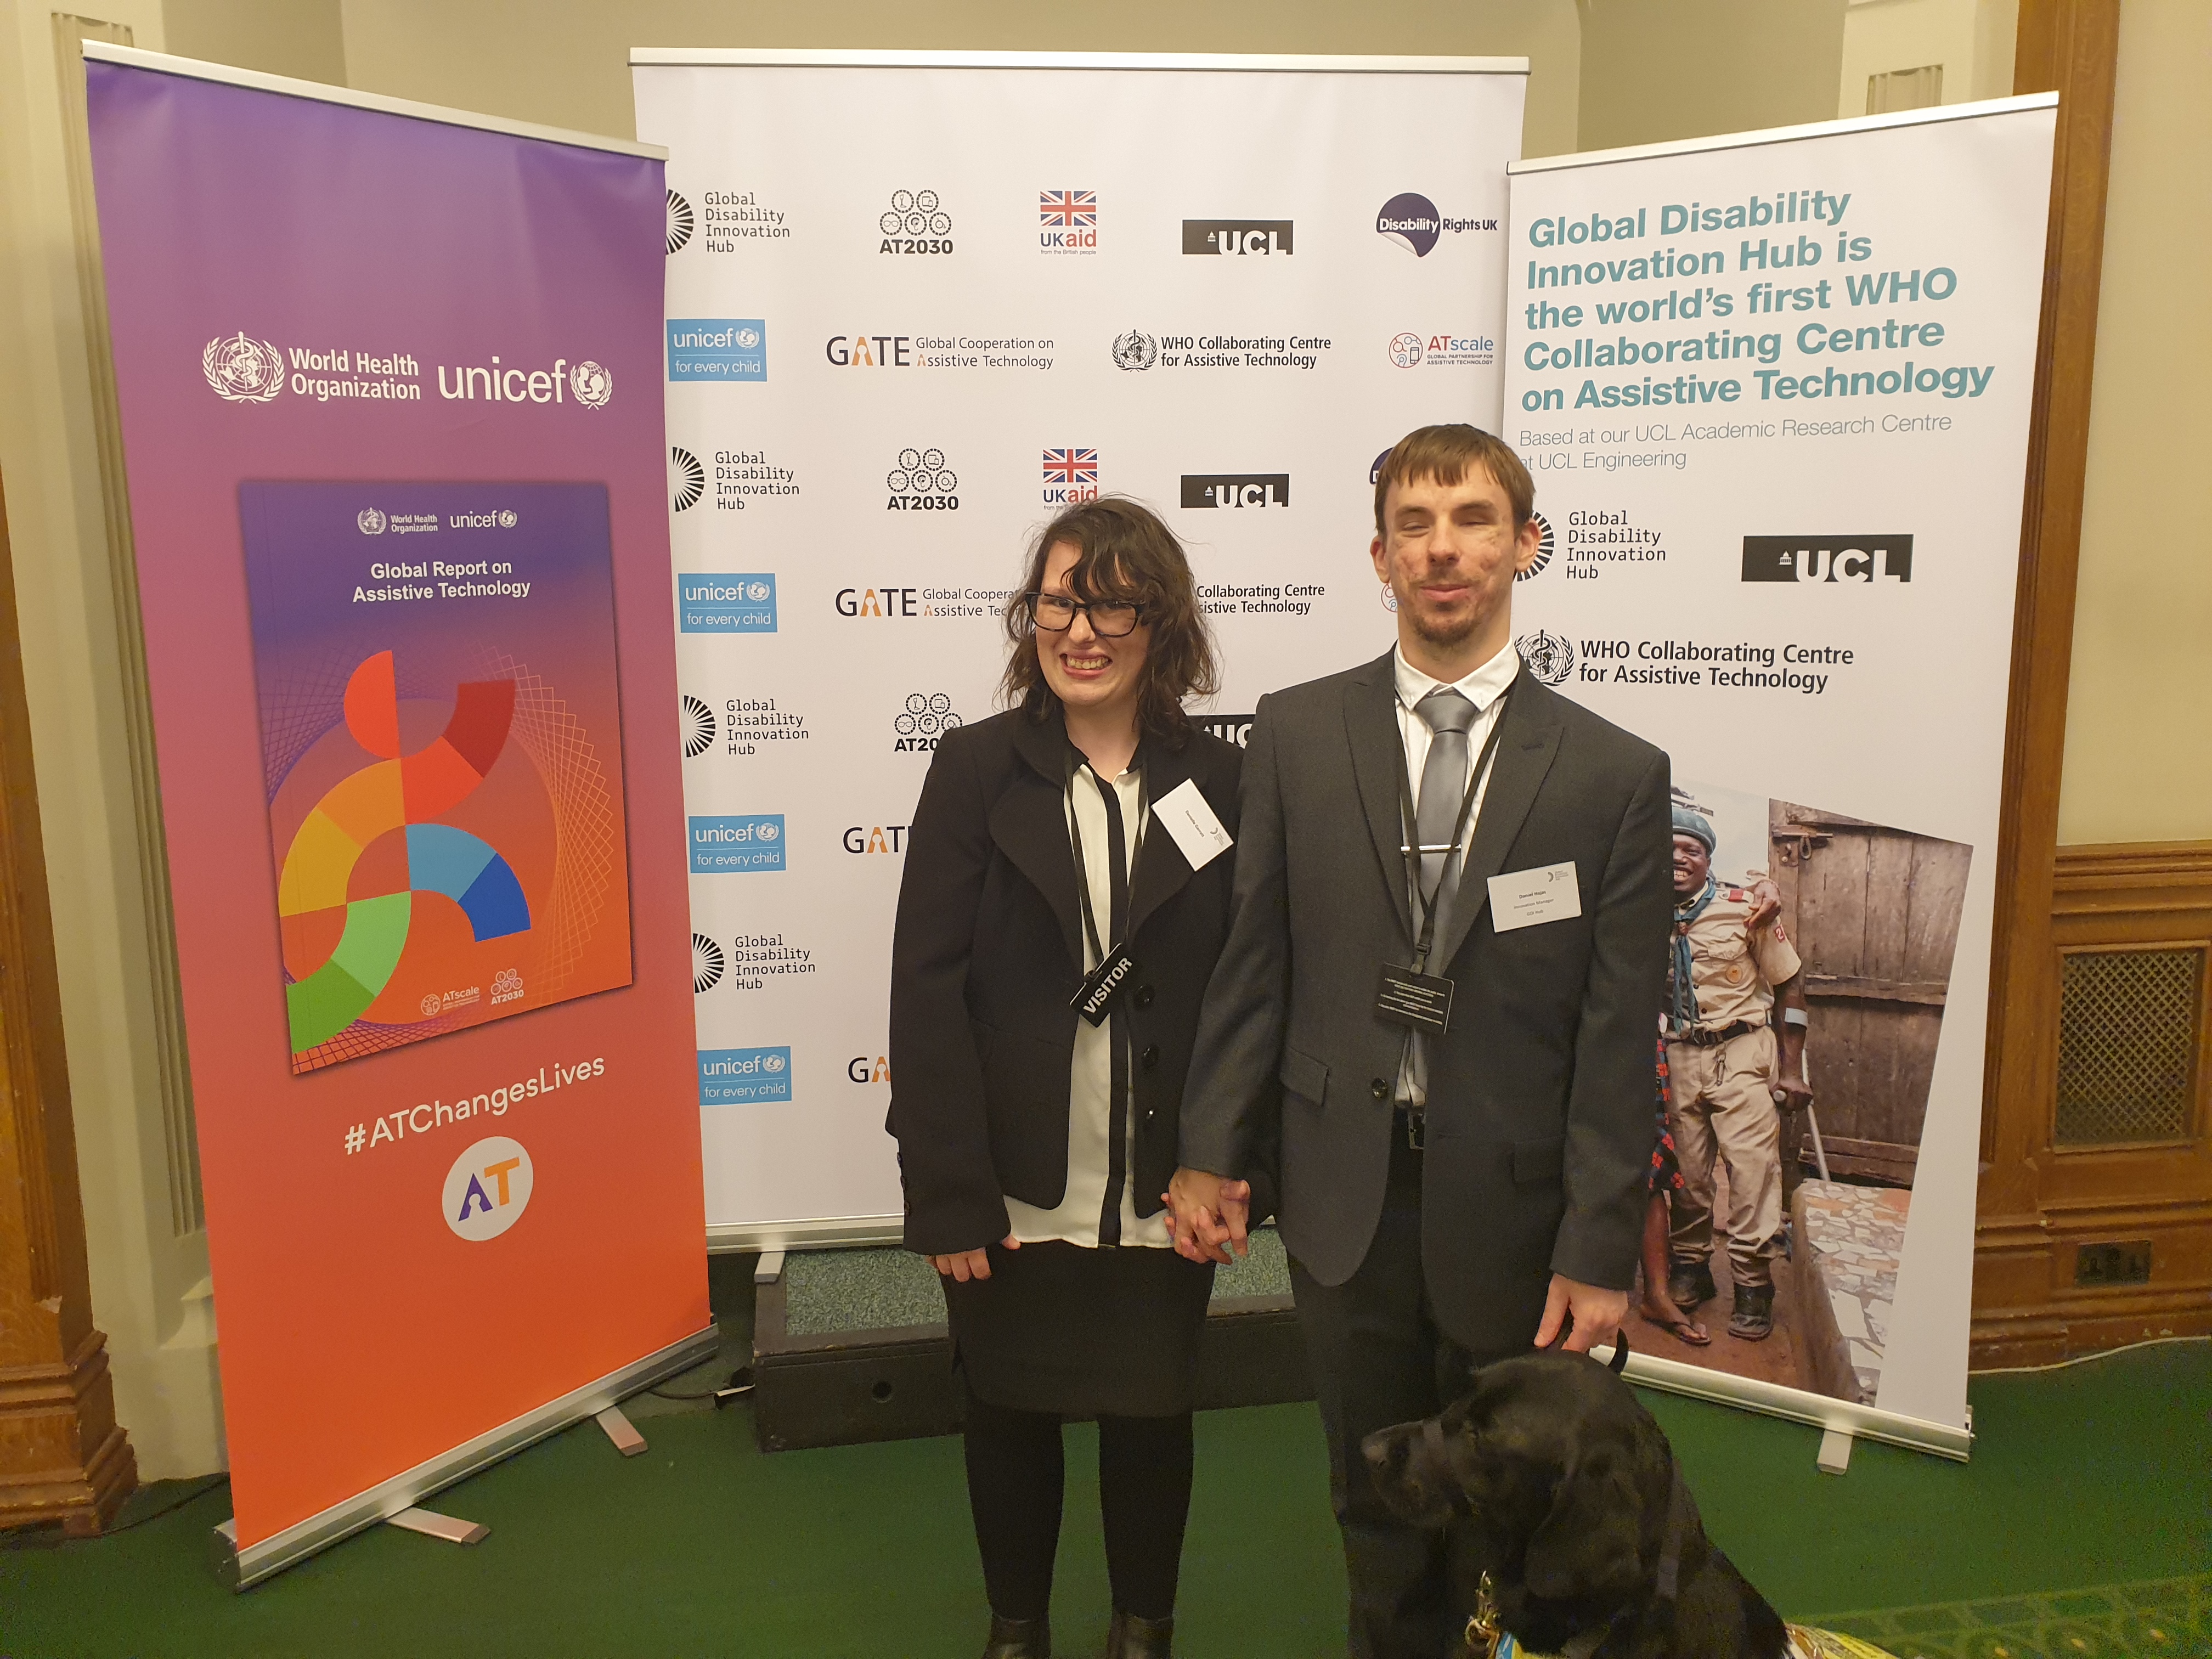 Daniel and Danielle are photographed in the UK Parliament. They are wearing smart clothing. A guide dog is sitting in front of them. In the background multiple signs are visible, such as logos of University College London, World Health Organisation, and GDI Hub. Other signs read 'AT changes lives' and 'Launching the Global Report on Assistive Technology'.